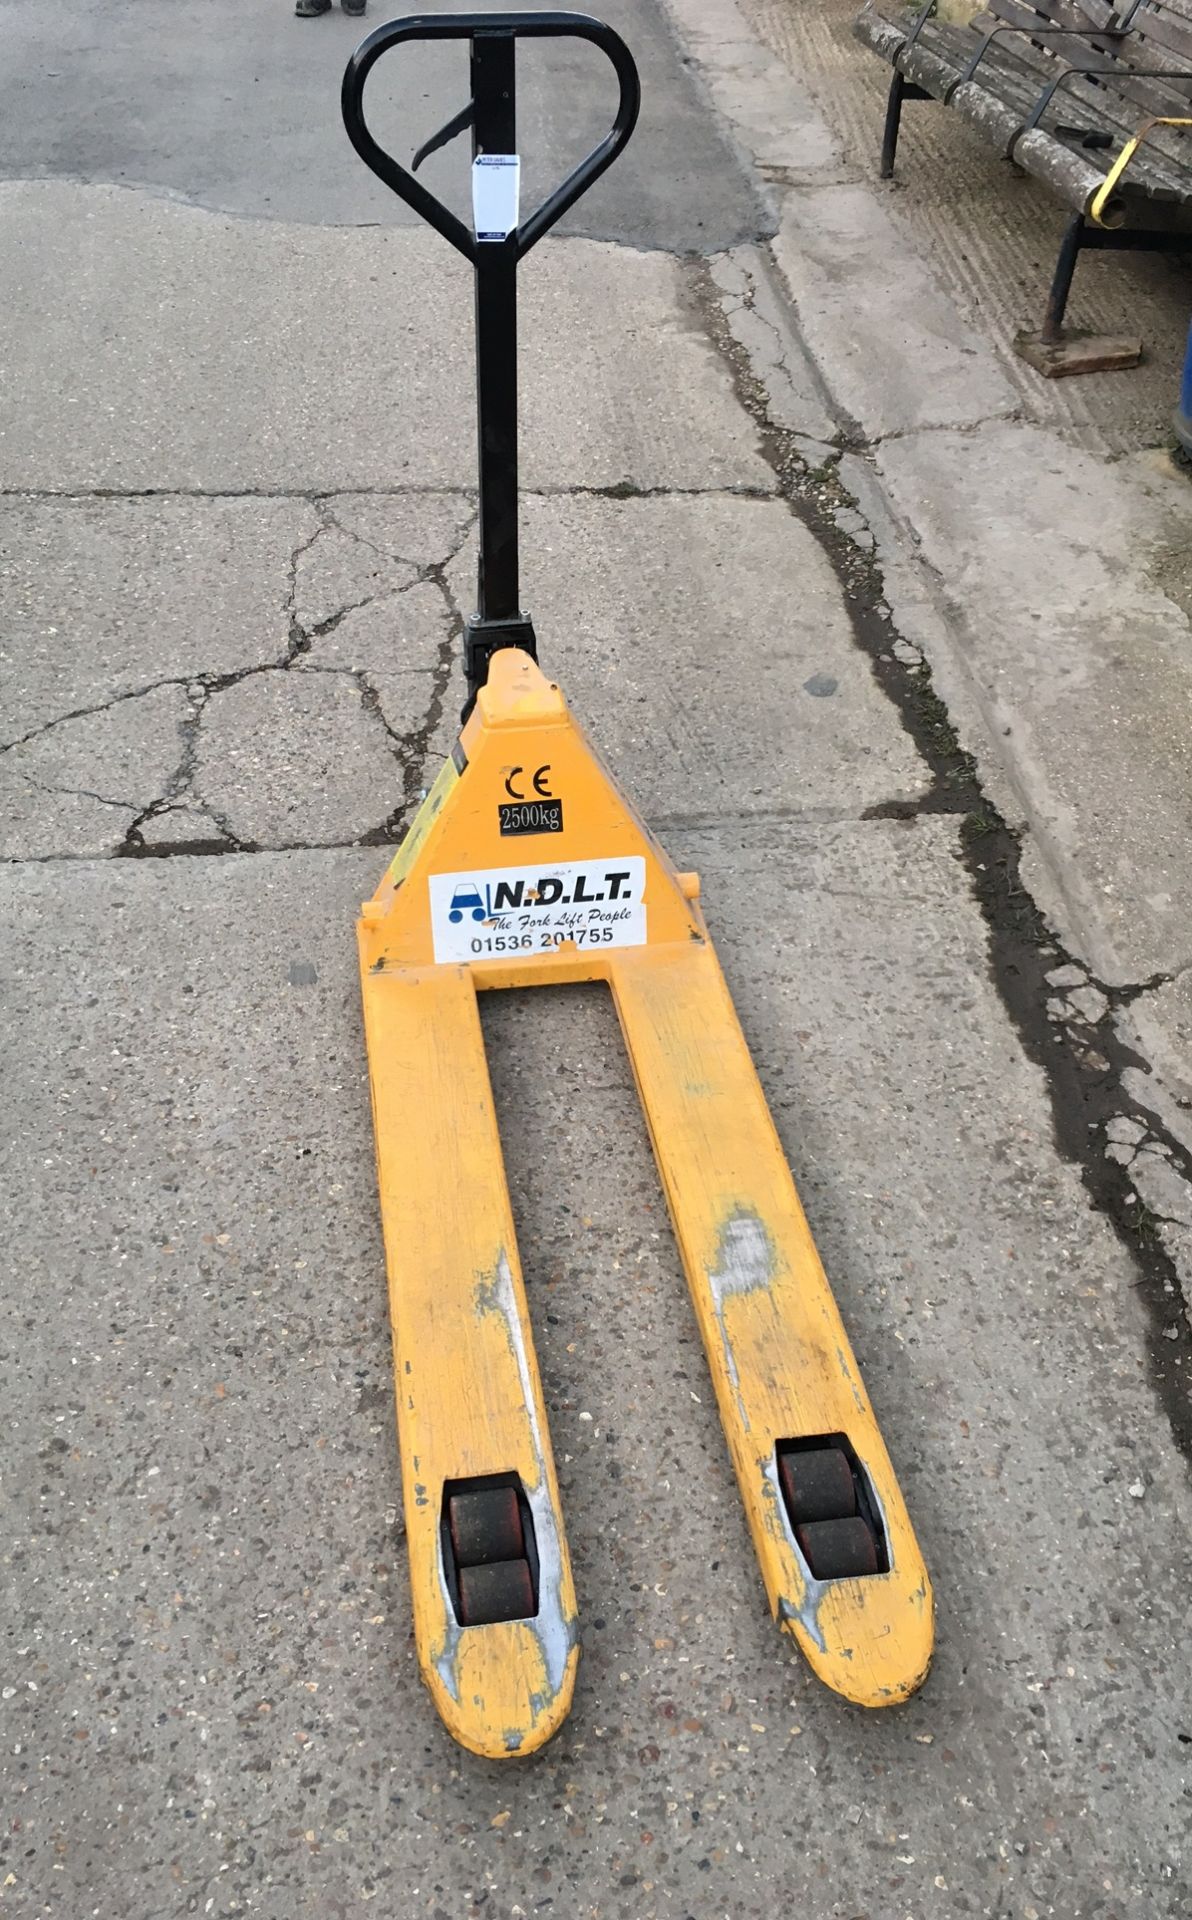 2500kg Manual Pallet Truck (Located at Wyngray Farm, St Mary’s Lane, Upminster, RM14 3NX - Viewing